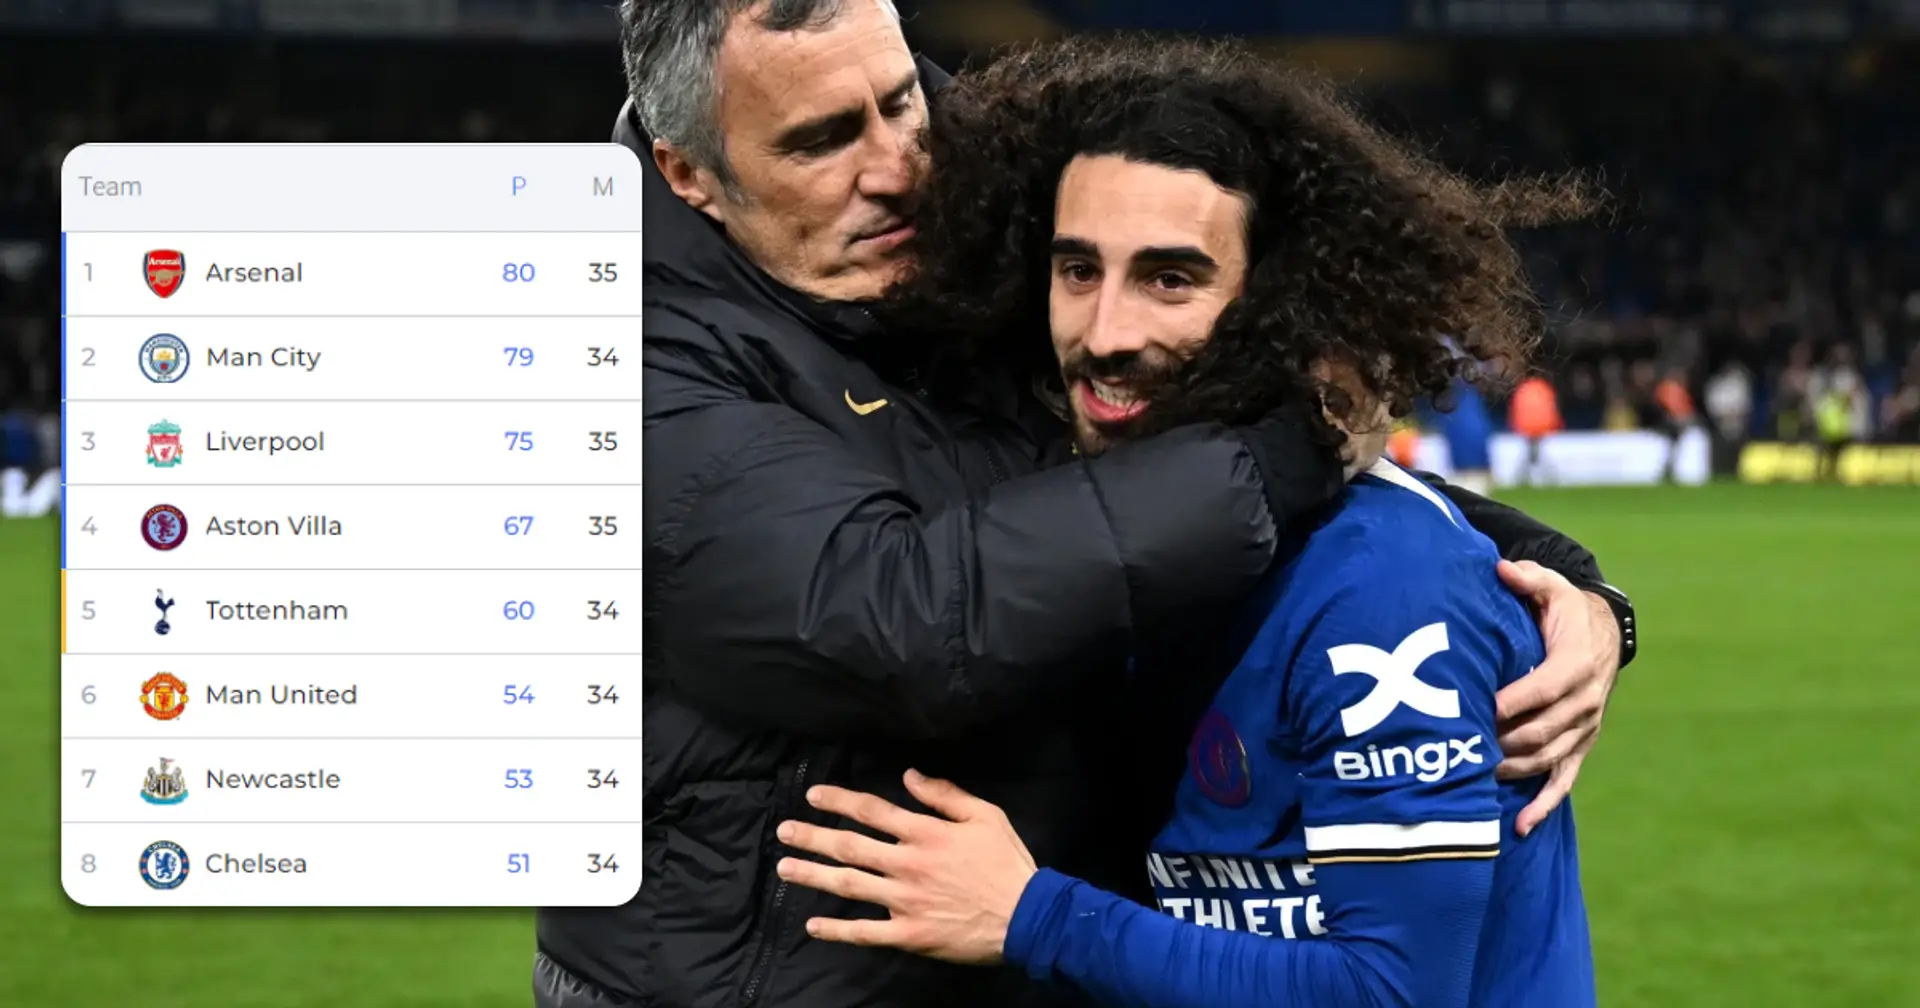 'We will see the table': Marc Cucurella reveals Chelsea chances for European football after Tottenham win 